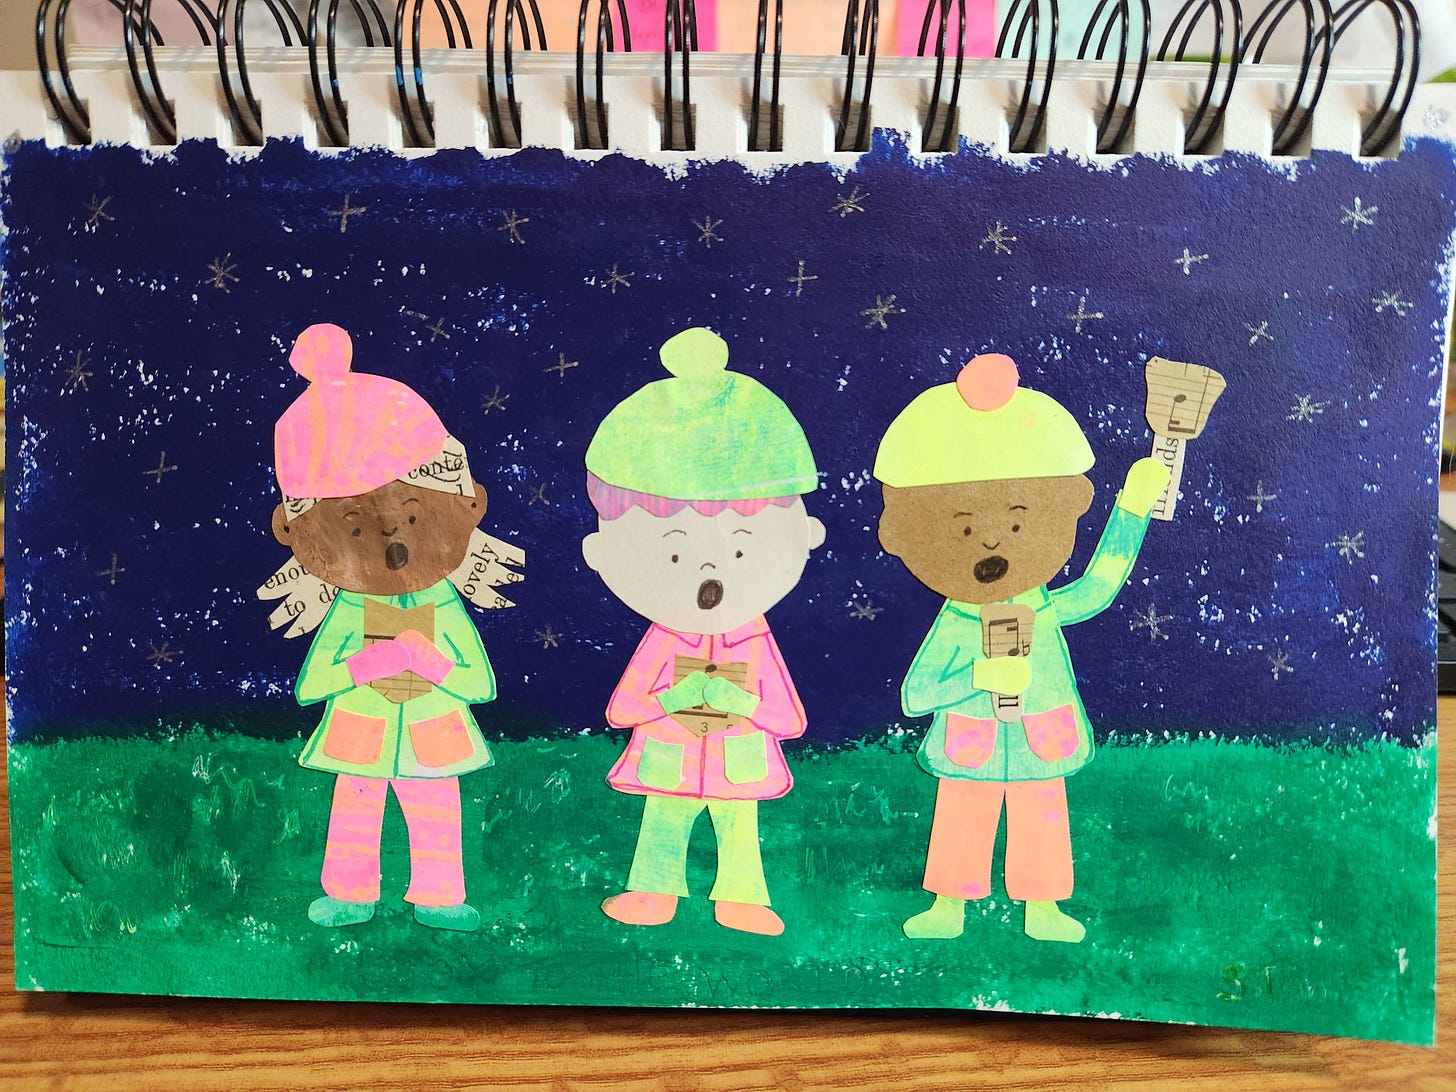 three children singing, with a starry night sky. One child is playing the bells.